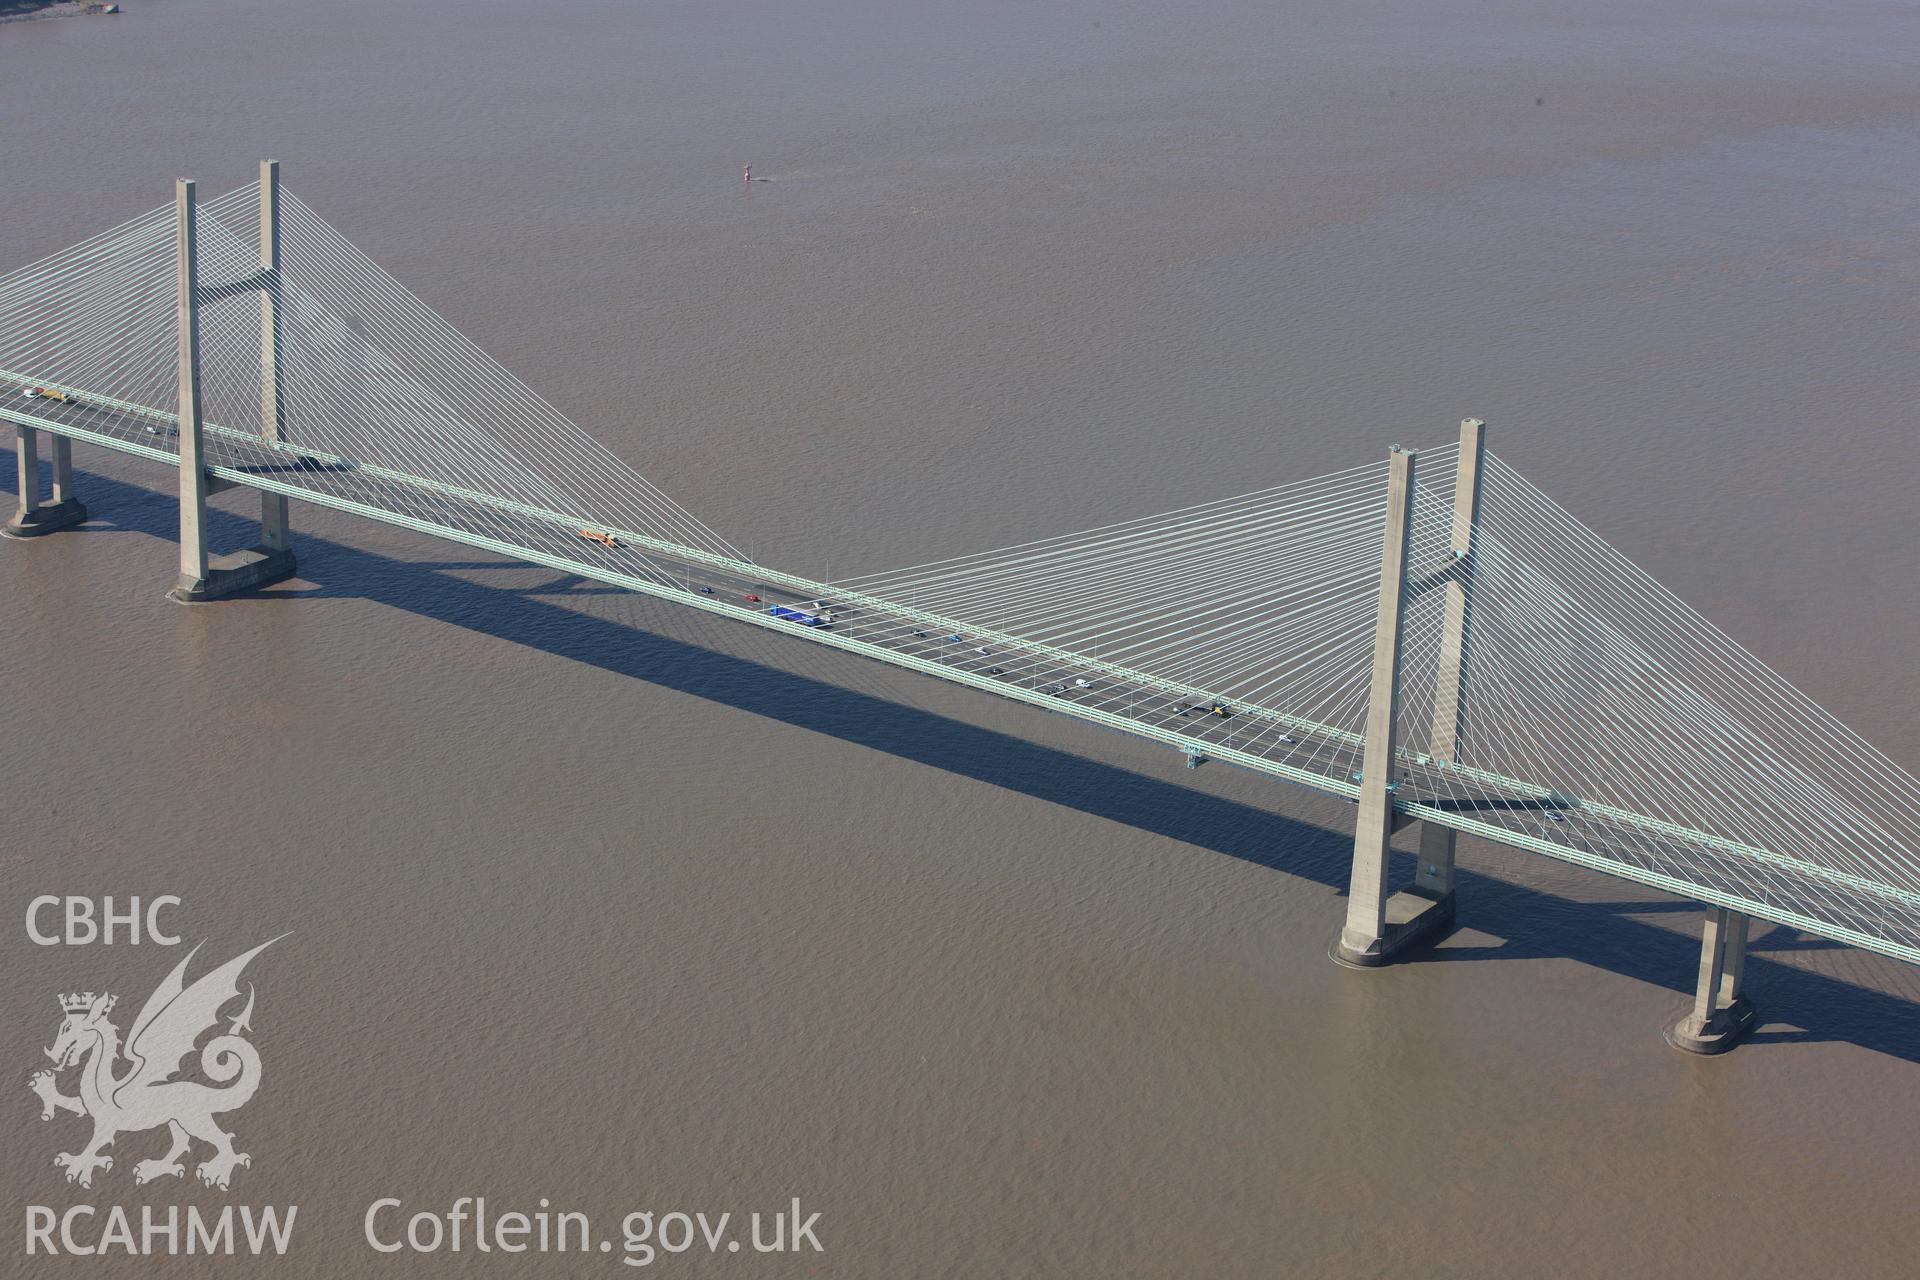 RCAHMW colour oblique photograph of Second Severn Crossing, M4 motorway. Taken by Toby Driver on 24/05/2010.